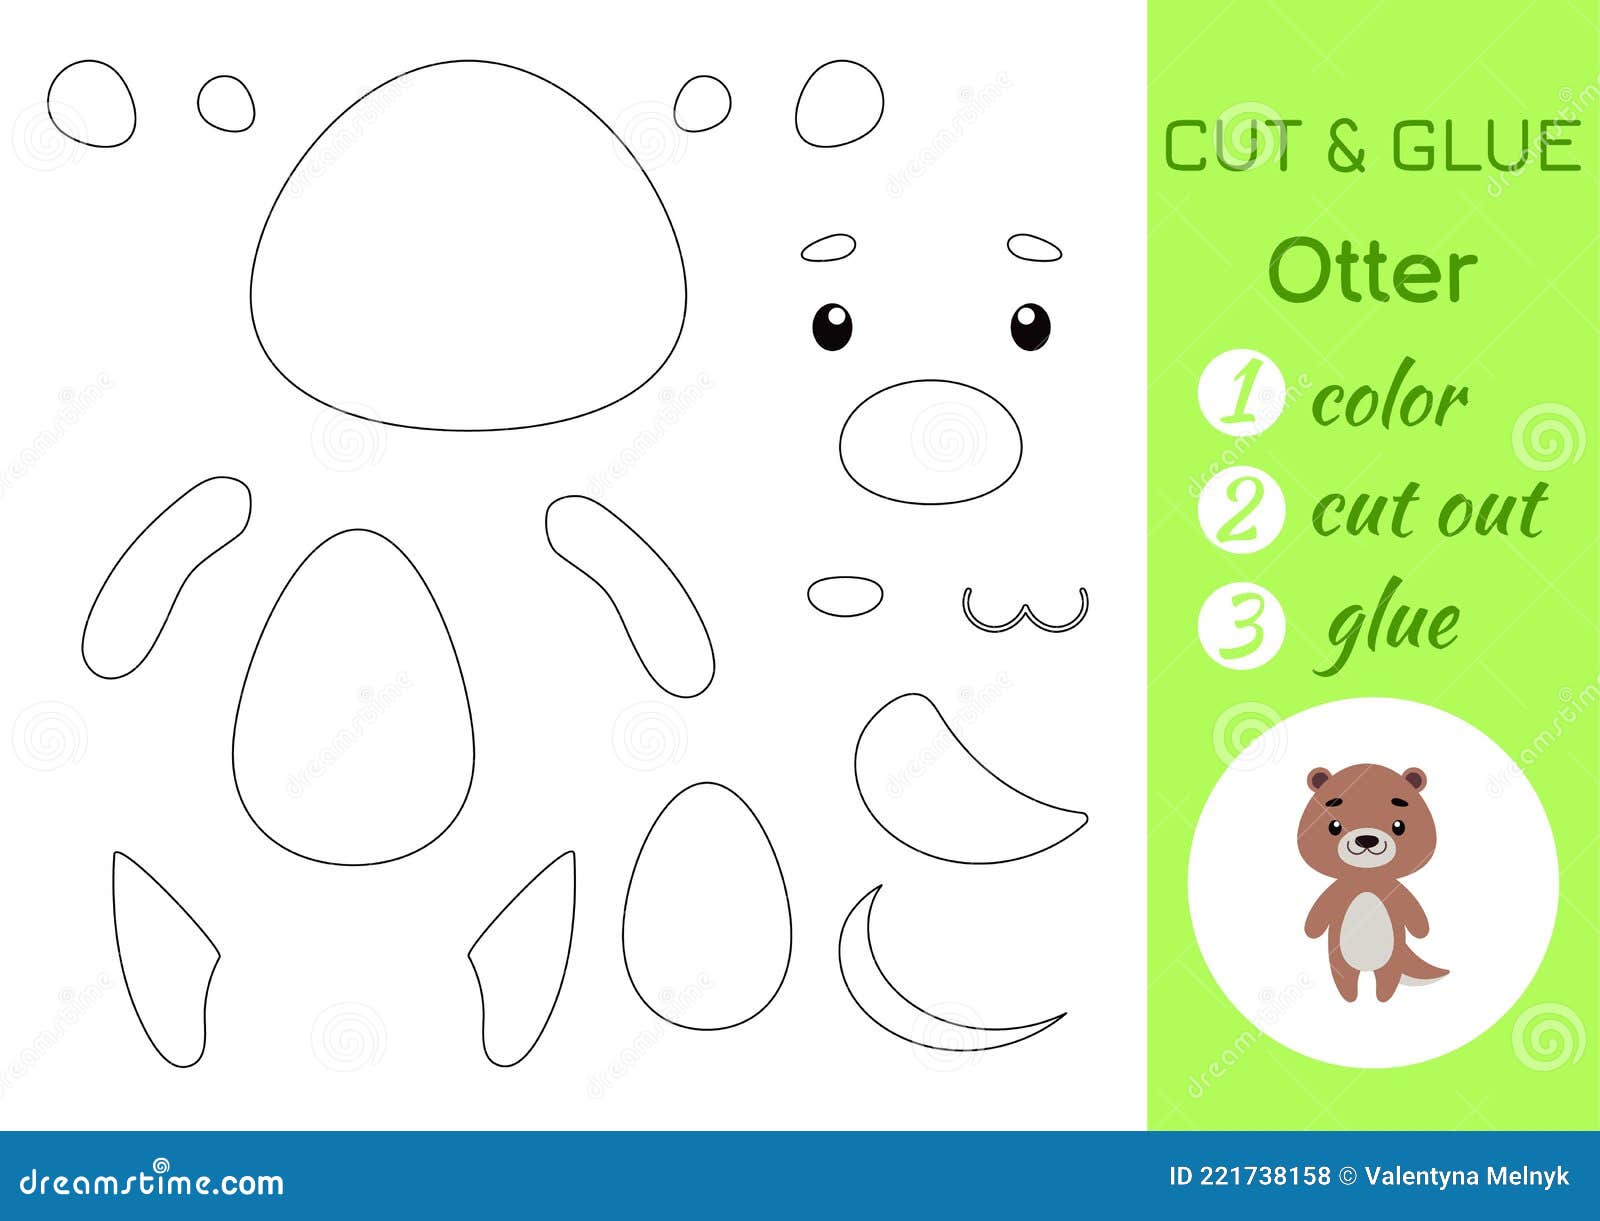 Color cut and glue paper little otter cut and paste crafts activity page educational game for preschool children stock vector